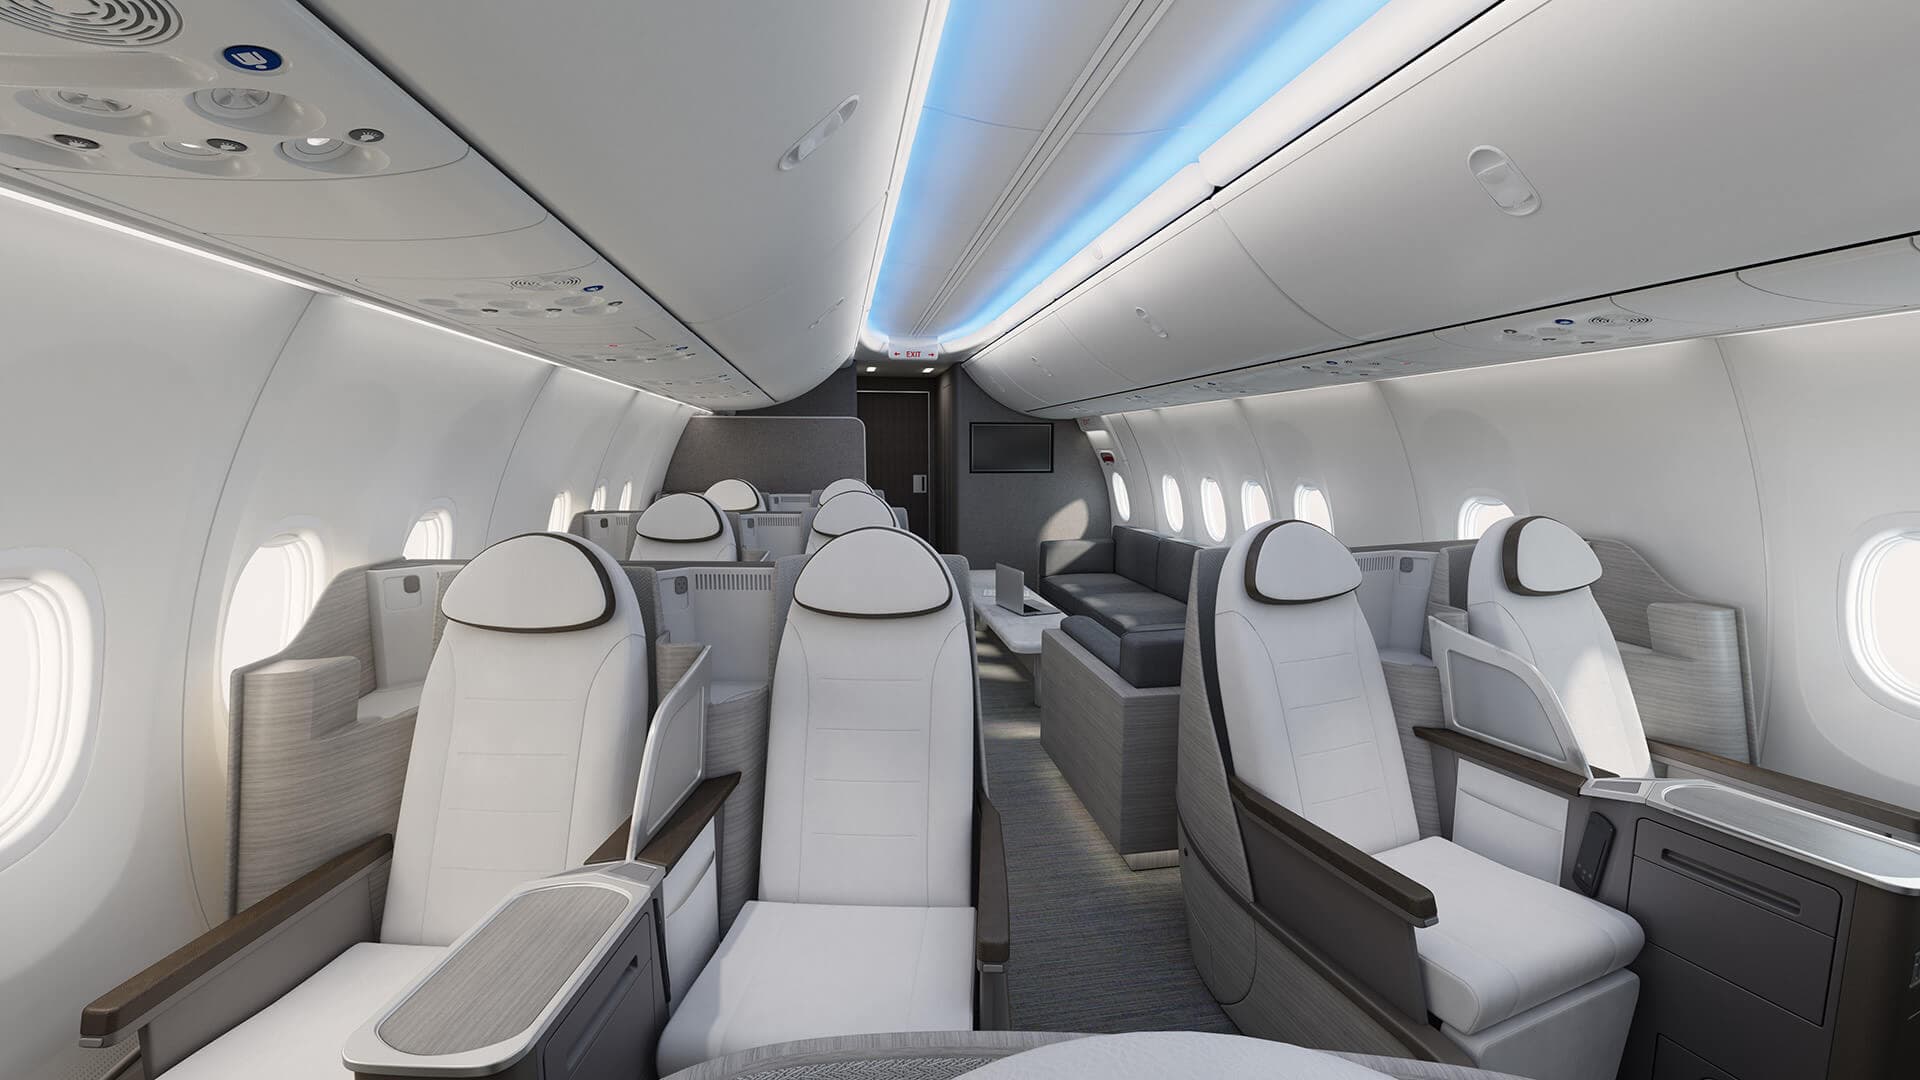 VIP aircraft interior with dynamic lighting